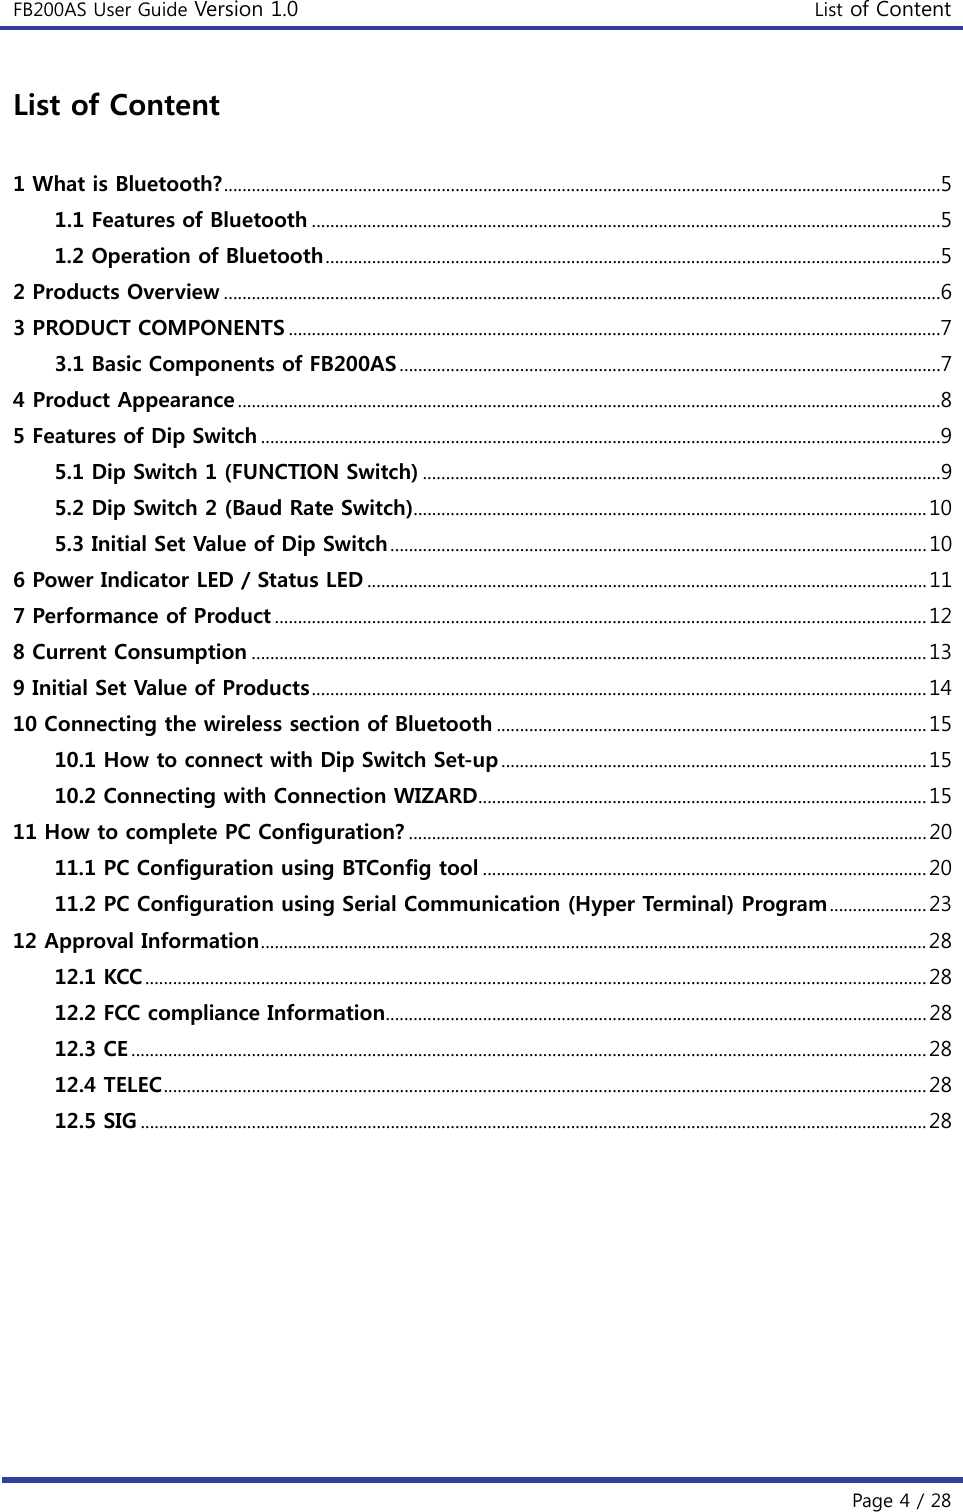 FB200AS User Guide Version 1.0 List of Content  Page 4 / 28 List of Content  1 What is Bluetooth? ...........................................................................................................................................................5 1.1 Features of Bluetooth ........................................................................................................................................5 1.2 Operation of Bluetooth .....................................................................................................................................5 2 Products Overview ...........................................................................................................................................................6 3 PRODUCT COMPONENTS .............................................................................................................................................7 3.1 Basic Components of FB200AS .....................................................................................................................7 4 Product Appearance ........................................................................................................................................................8 5 Features of Dip Switch ...................................................................................................................................................9 5.1 Dip Switch 1 (FUNCTION Switch) ................................................................................................................9 5.2 Dip Switch 2 (Baud Rate Switch) ............................................................................................................... 10 5.3 Initial Set Value of Dip Switch .................................................................................................................... 10 6 Power Indicator LED / Status LED ......................................................................................................................... 11 7 Performance of Product ............................................................................................................................................. 12 8 Current Consumption .................................................................................................................................................. 13 9 Initial Set Value of Products ..................................................................................................................................... 14 10 Connecting the wireless section of Bluetooth ............................................................................................. 15 10.1 How to connect with Dip Switch Set-up ............................................................................................ 15 10.2 Connecting with Connection WIZARD ................................................................................................. 15 11 How to complete PC Configuration? ................................................................................................................ 20 11.1 PC Configuration using BTConfig tool ................................................................................................ 20 11.2 PC Configuration using Serial Communication (Hyper Terminal) Program ..................... 23 12 Approval Information ................................................................................................................................................ 28 12.1 KCC ......................................................................................................................................................................... 28 12.2 FCC compliance Information ..................................................................................................................... 28 12.3 CE ............................................................................................................................................................................ 28 12.4 TELEC ..................................................................................................................................................................... 28 12.5 SIG .......................................................................................................................................................................... 28    